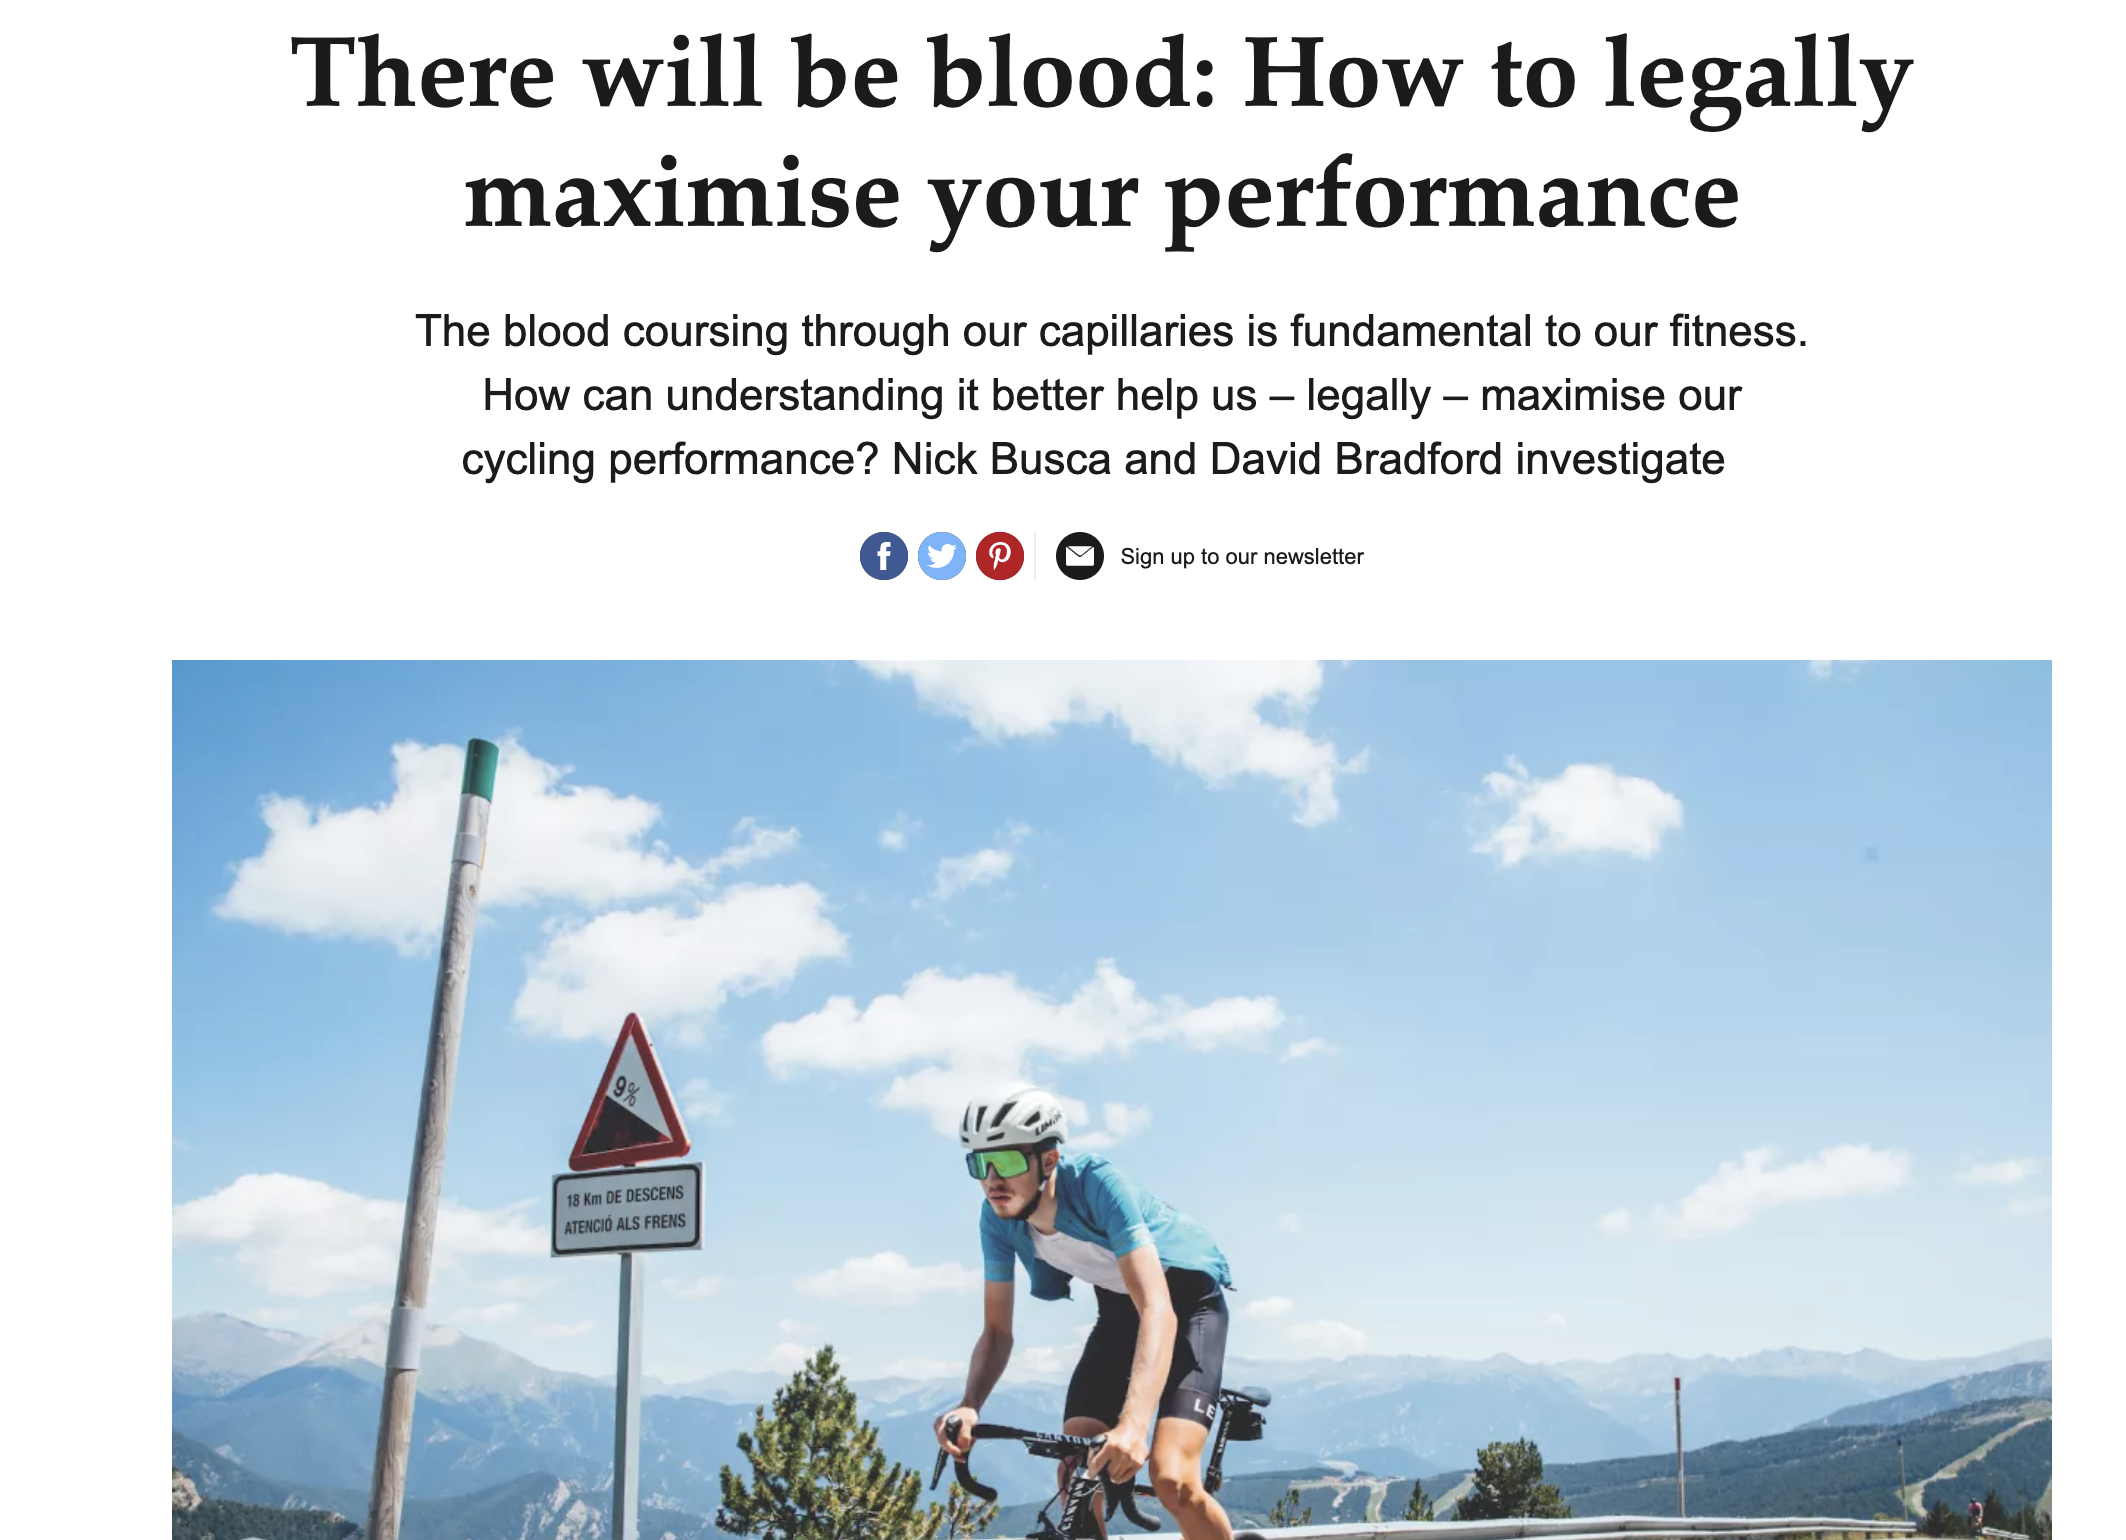 There will be blood: How to legally maximise your performance